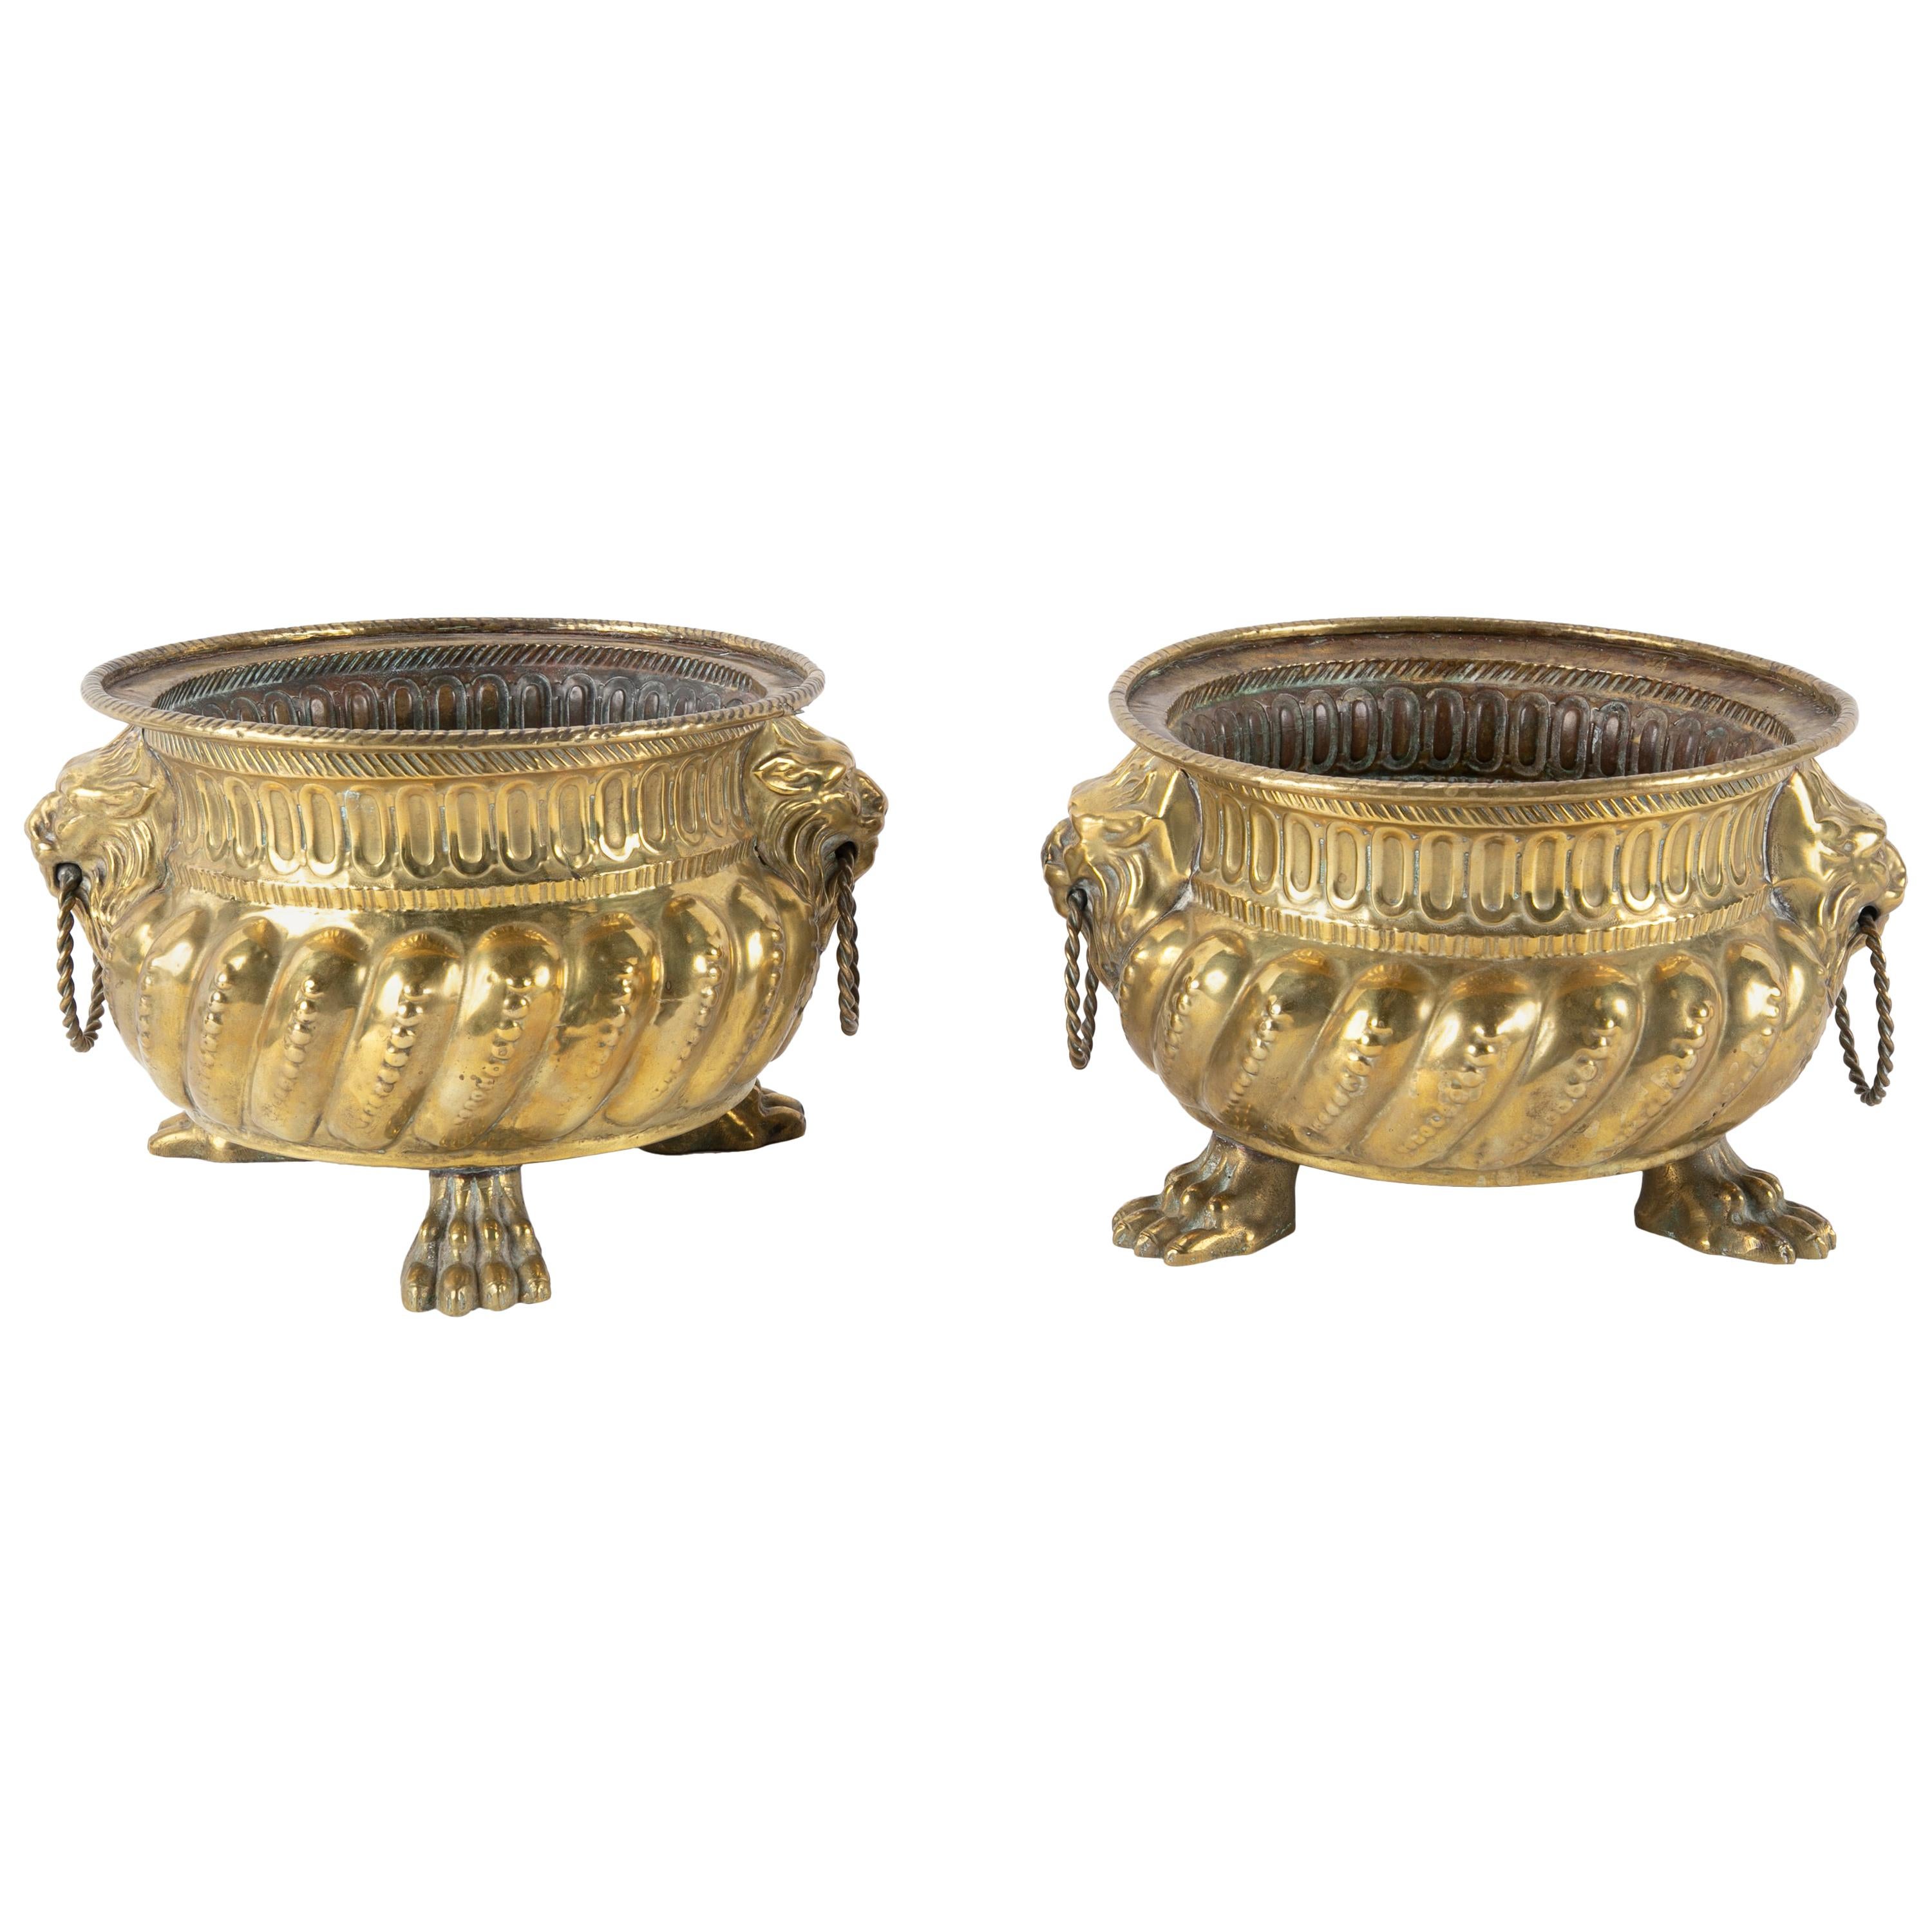 Dutch Brass Cachepots with Lion Head Handles and Paw Feet, a Pair